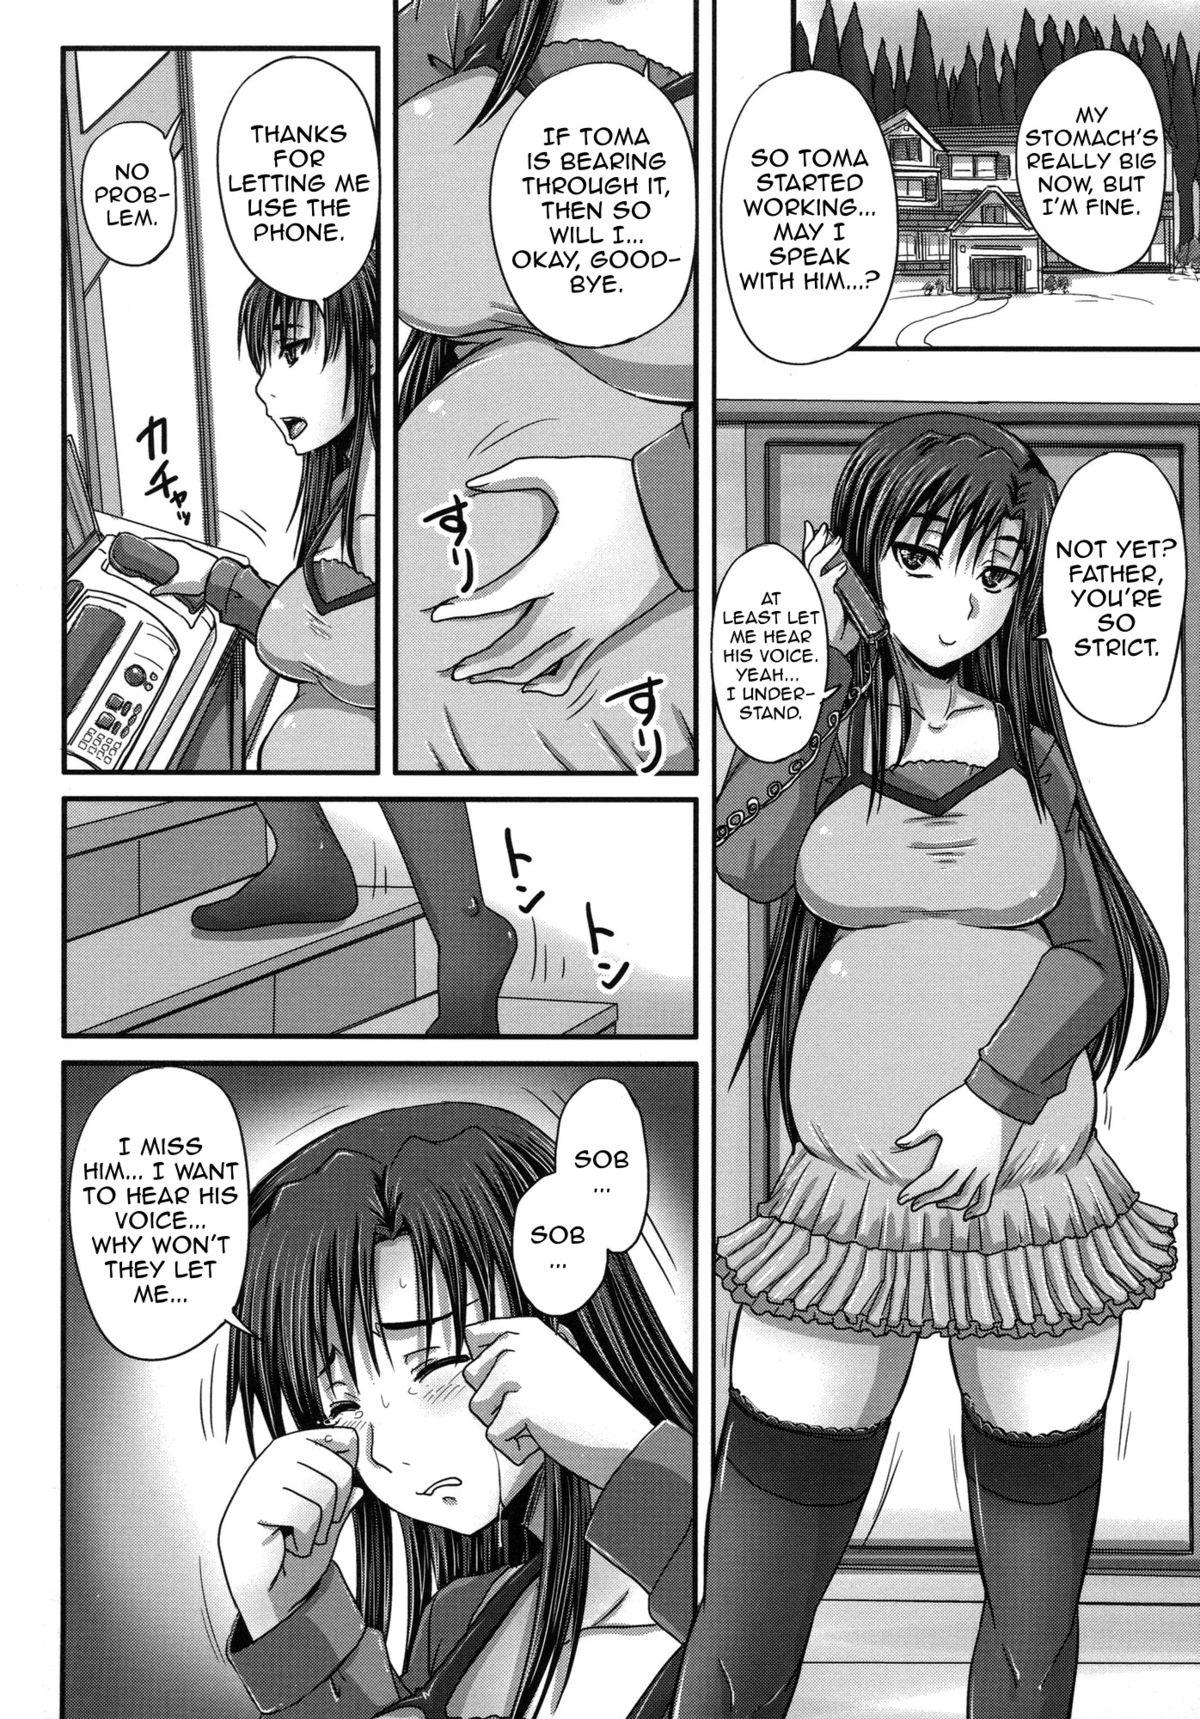 [Akigami Satoru] Tsukurou! Onaho Ane - Let's made a Sex Sleeve from Sister | Turning My Elder-Sister into a Sex-Sleeve [English] {doujin-moe.us} 64